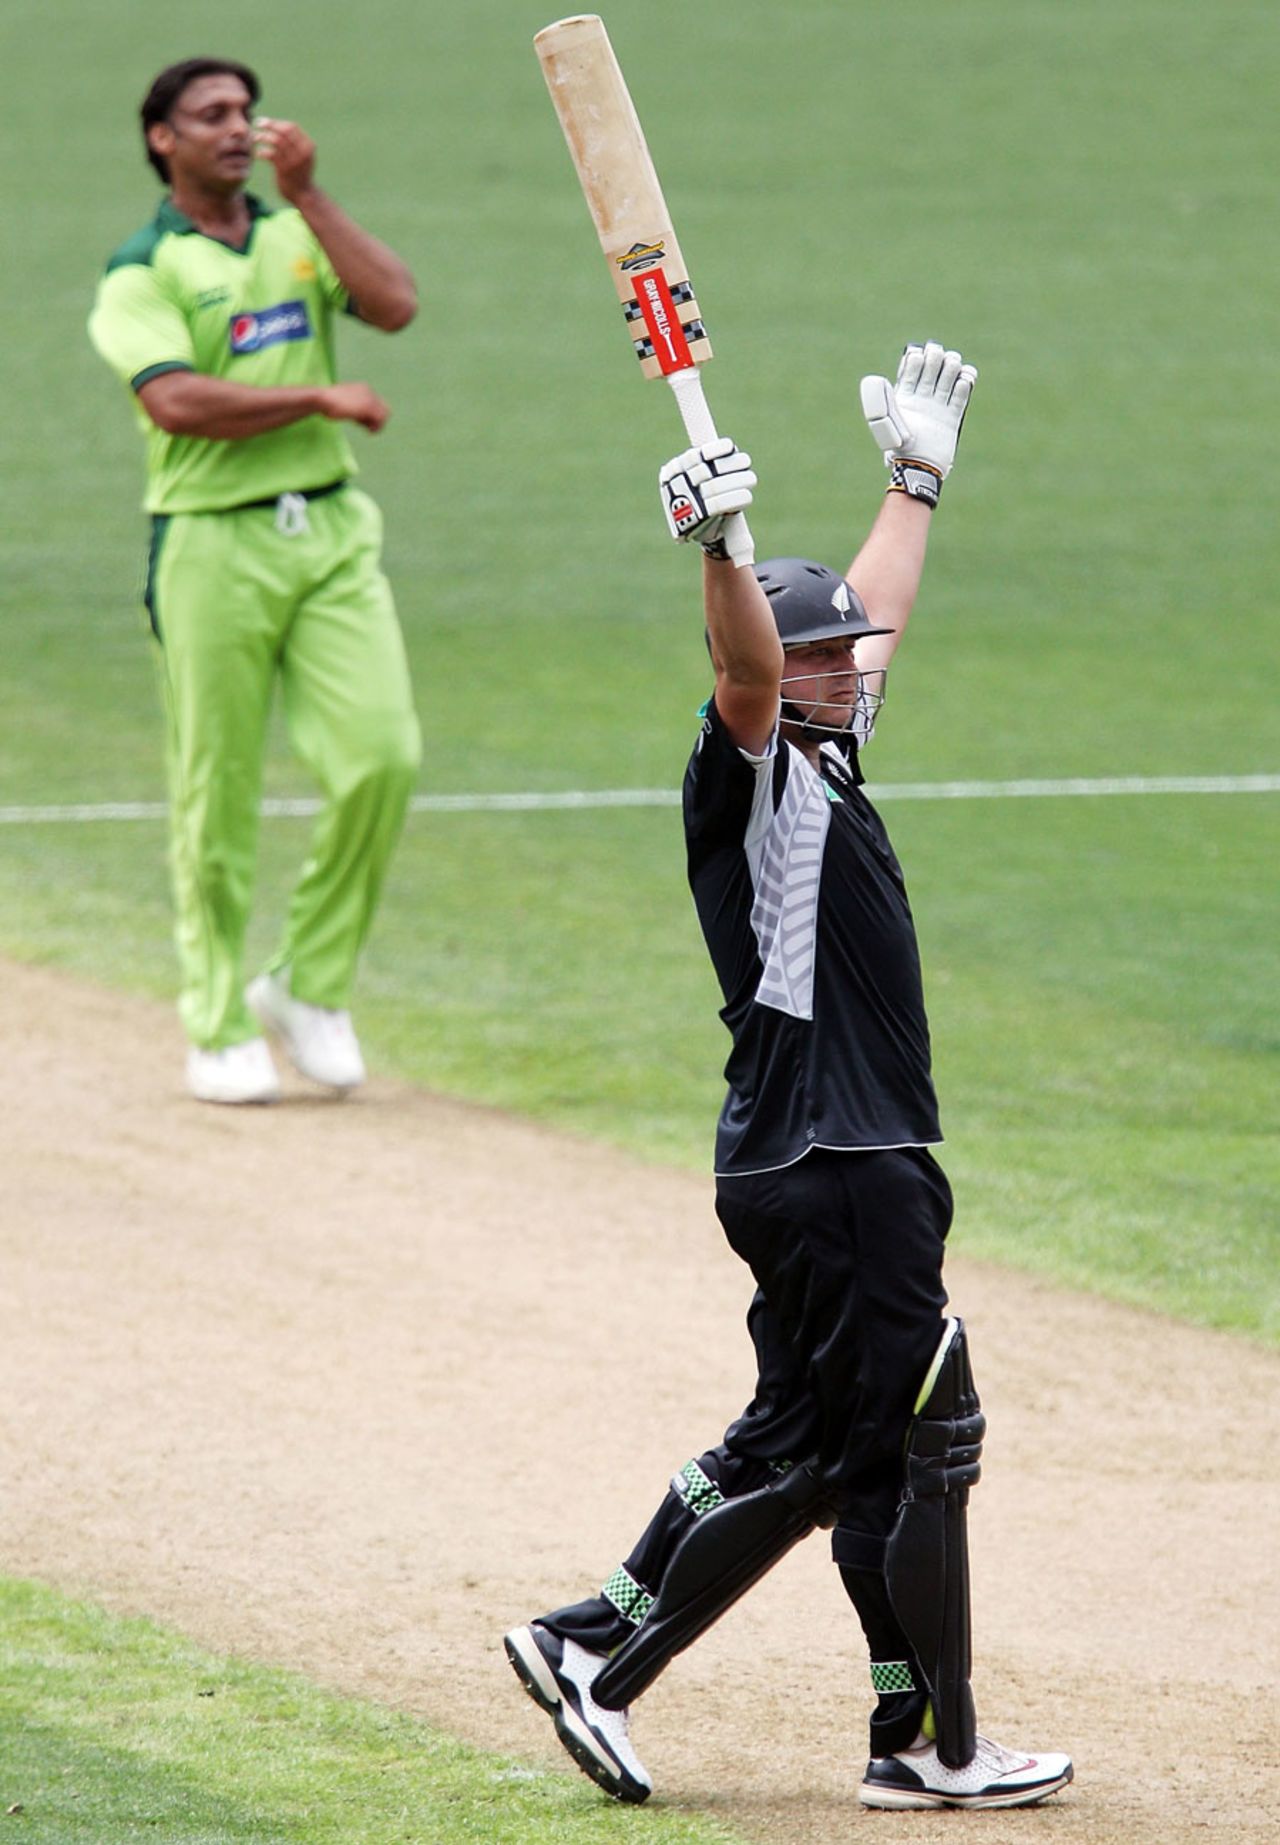 Jesse Ryder is pleased to reach his century, as Shoaib Akhtar watches, New Zealand v Pakistan, 6th ODI, Auckland, February 5, 2011